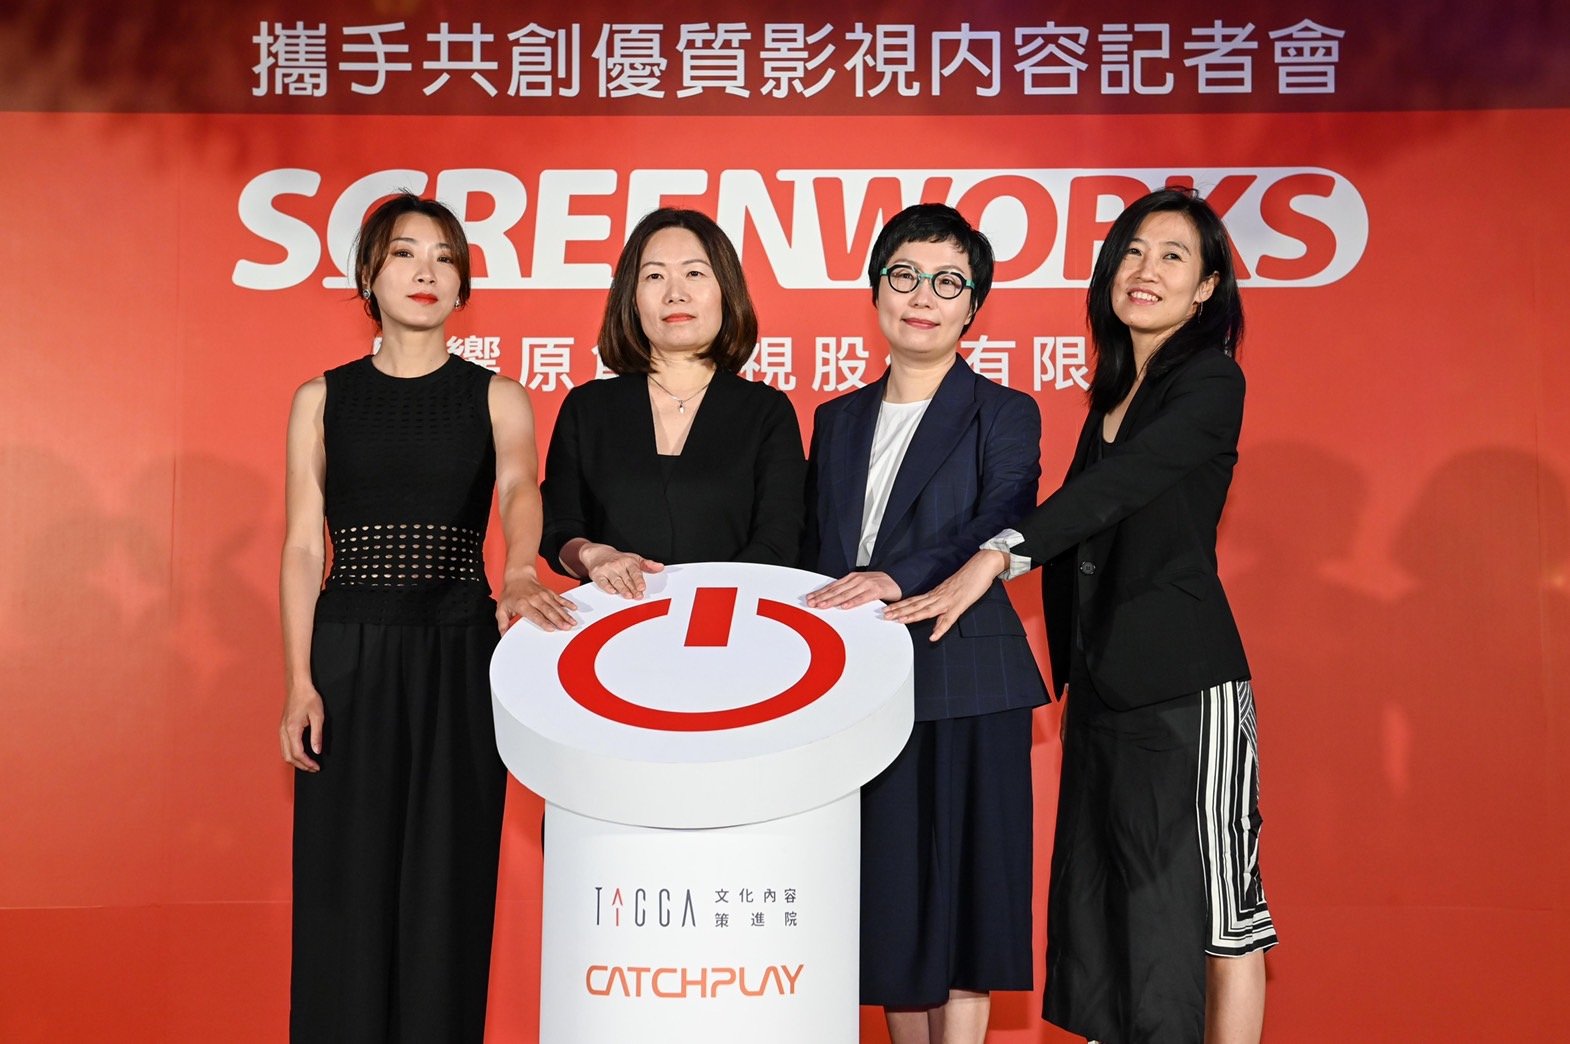 SCREENDAILY:  Taiwan’s TAICCA, Catchplay launch joint venture to create international content